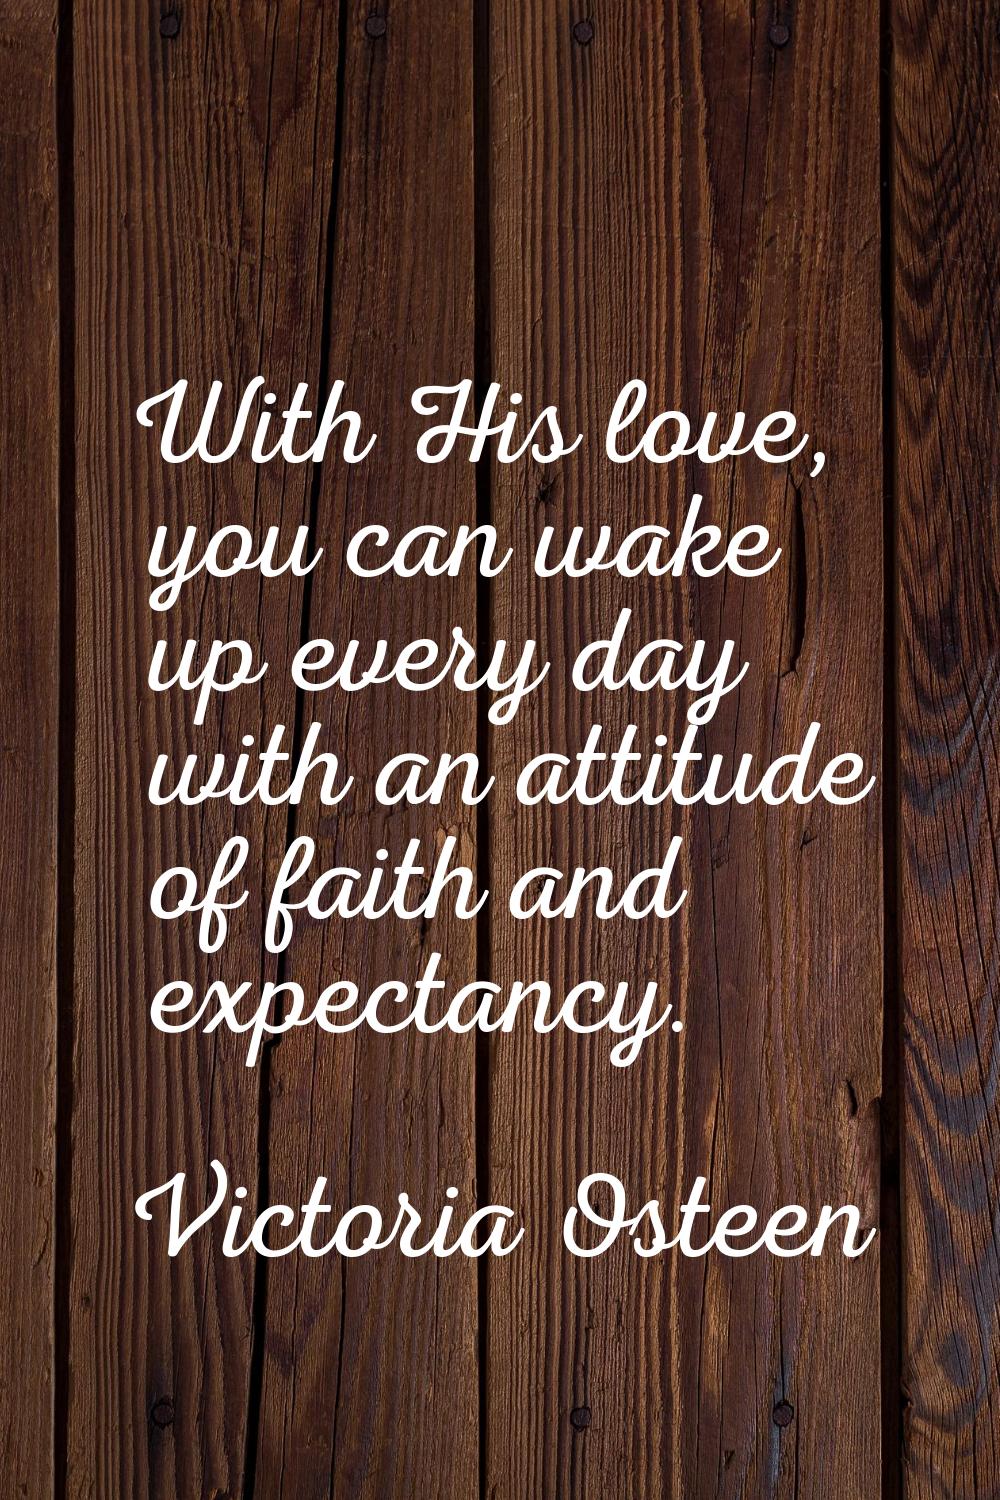 With His love, you can wake up every day with an attitude of faith and expectancy.